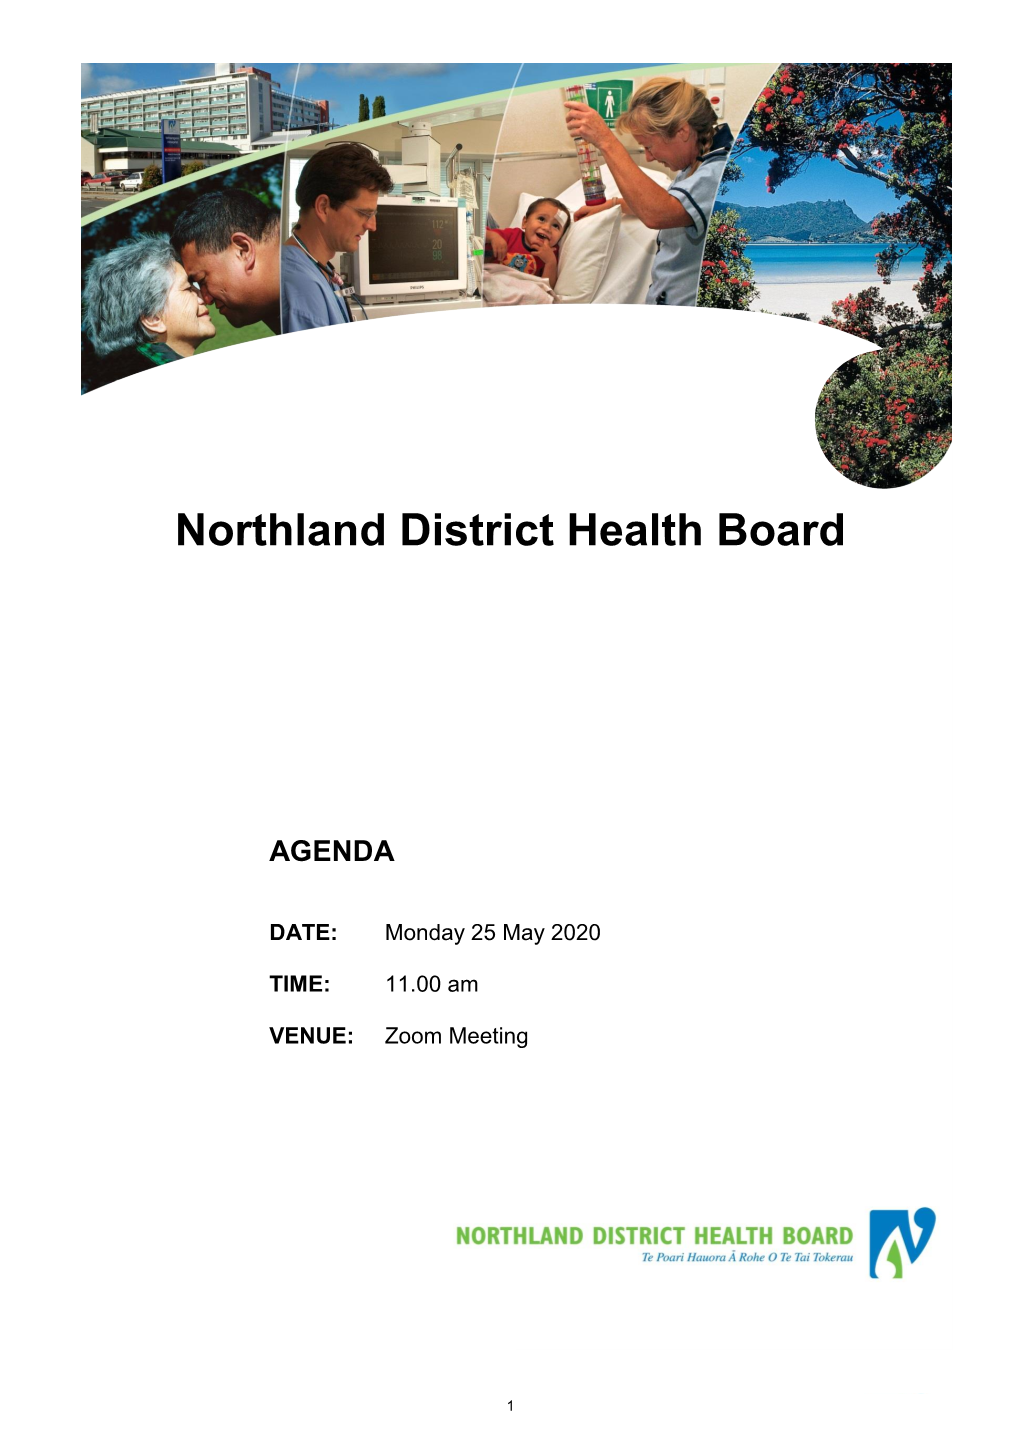 District Health Boards